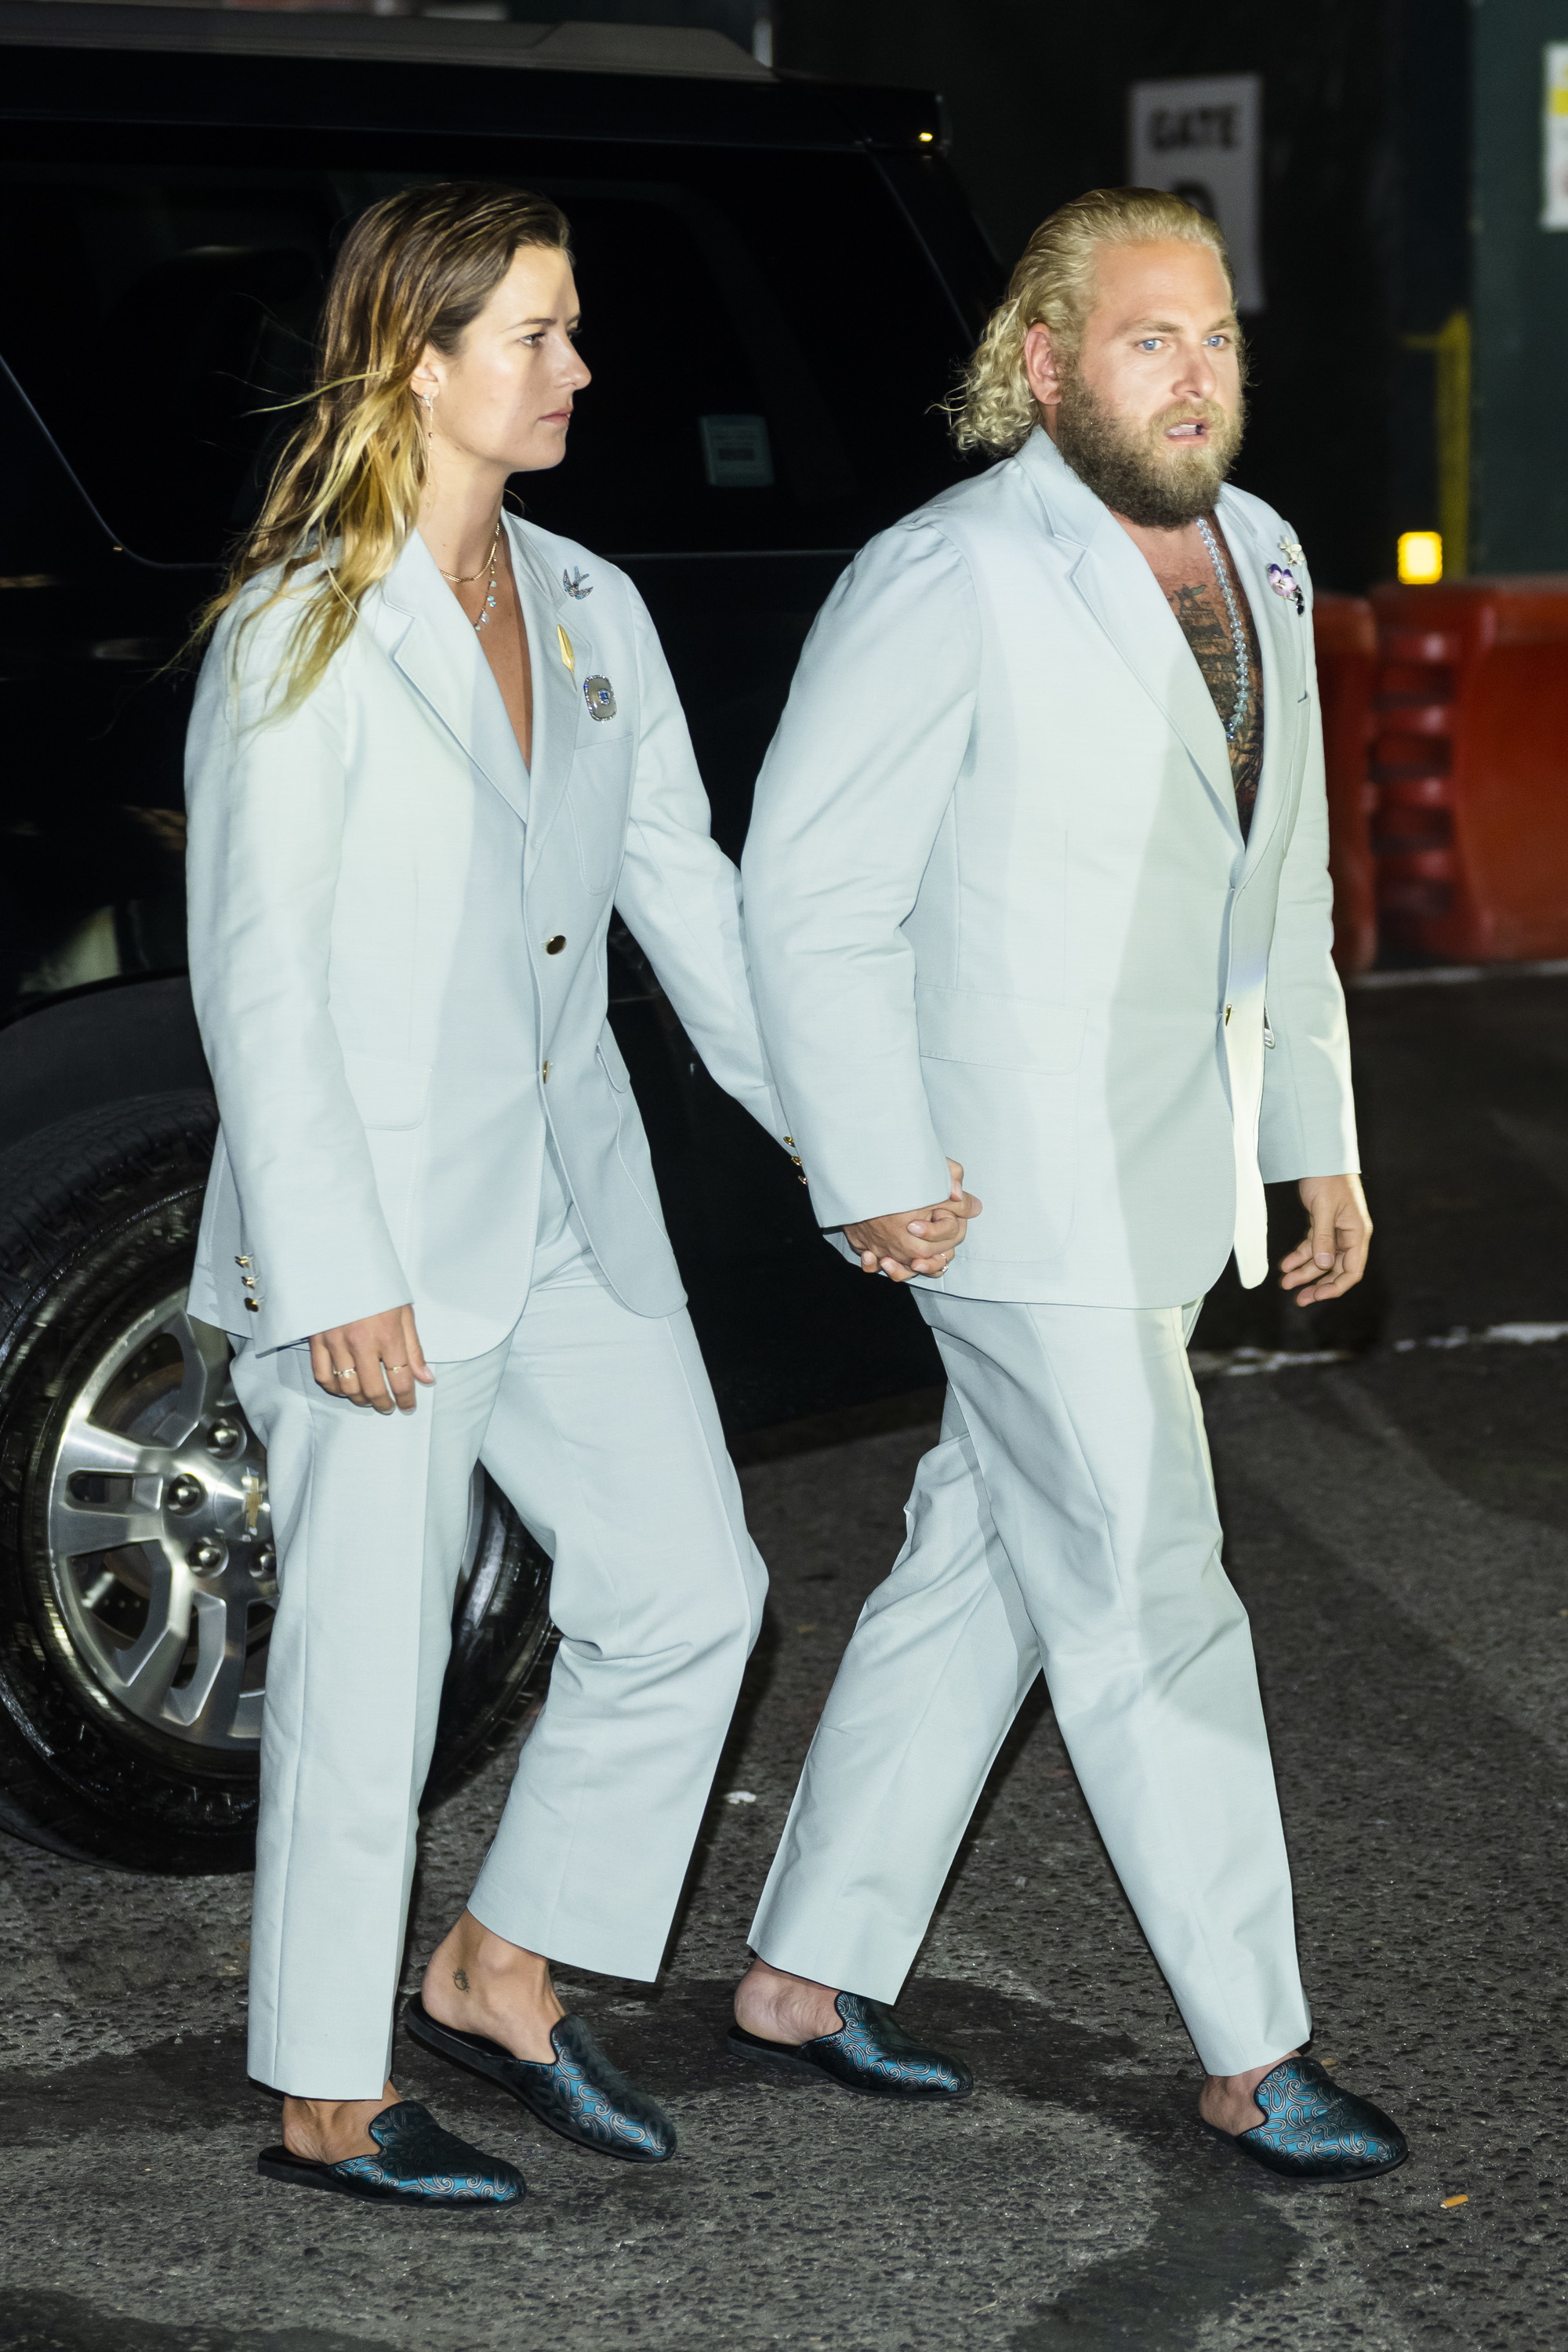 The couple walking to an event wearing matching pantsuits and slip-on looafers